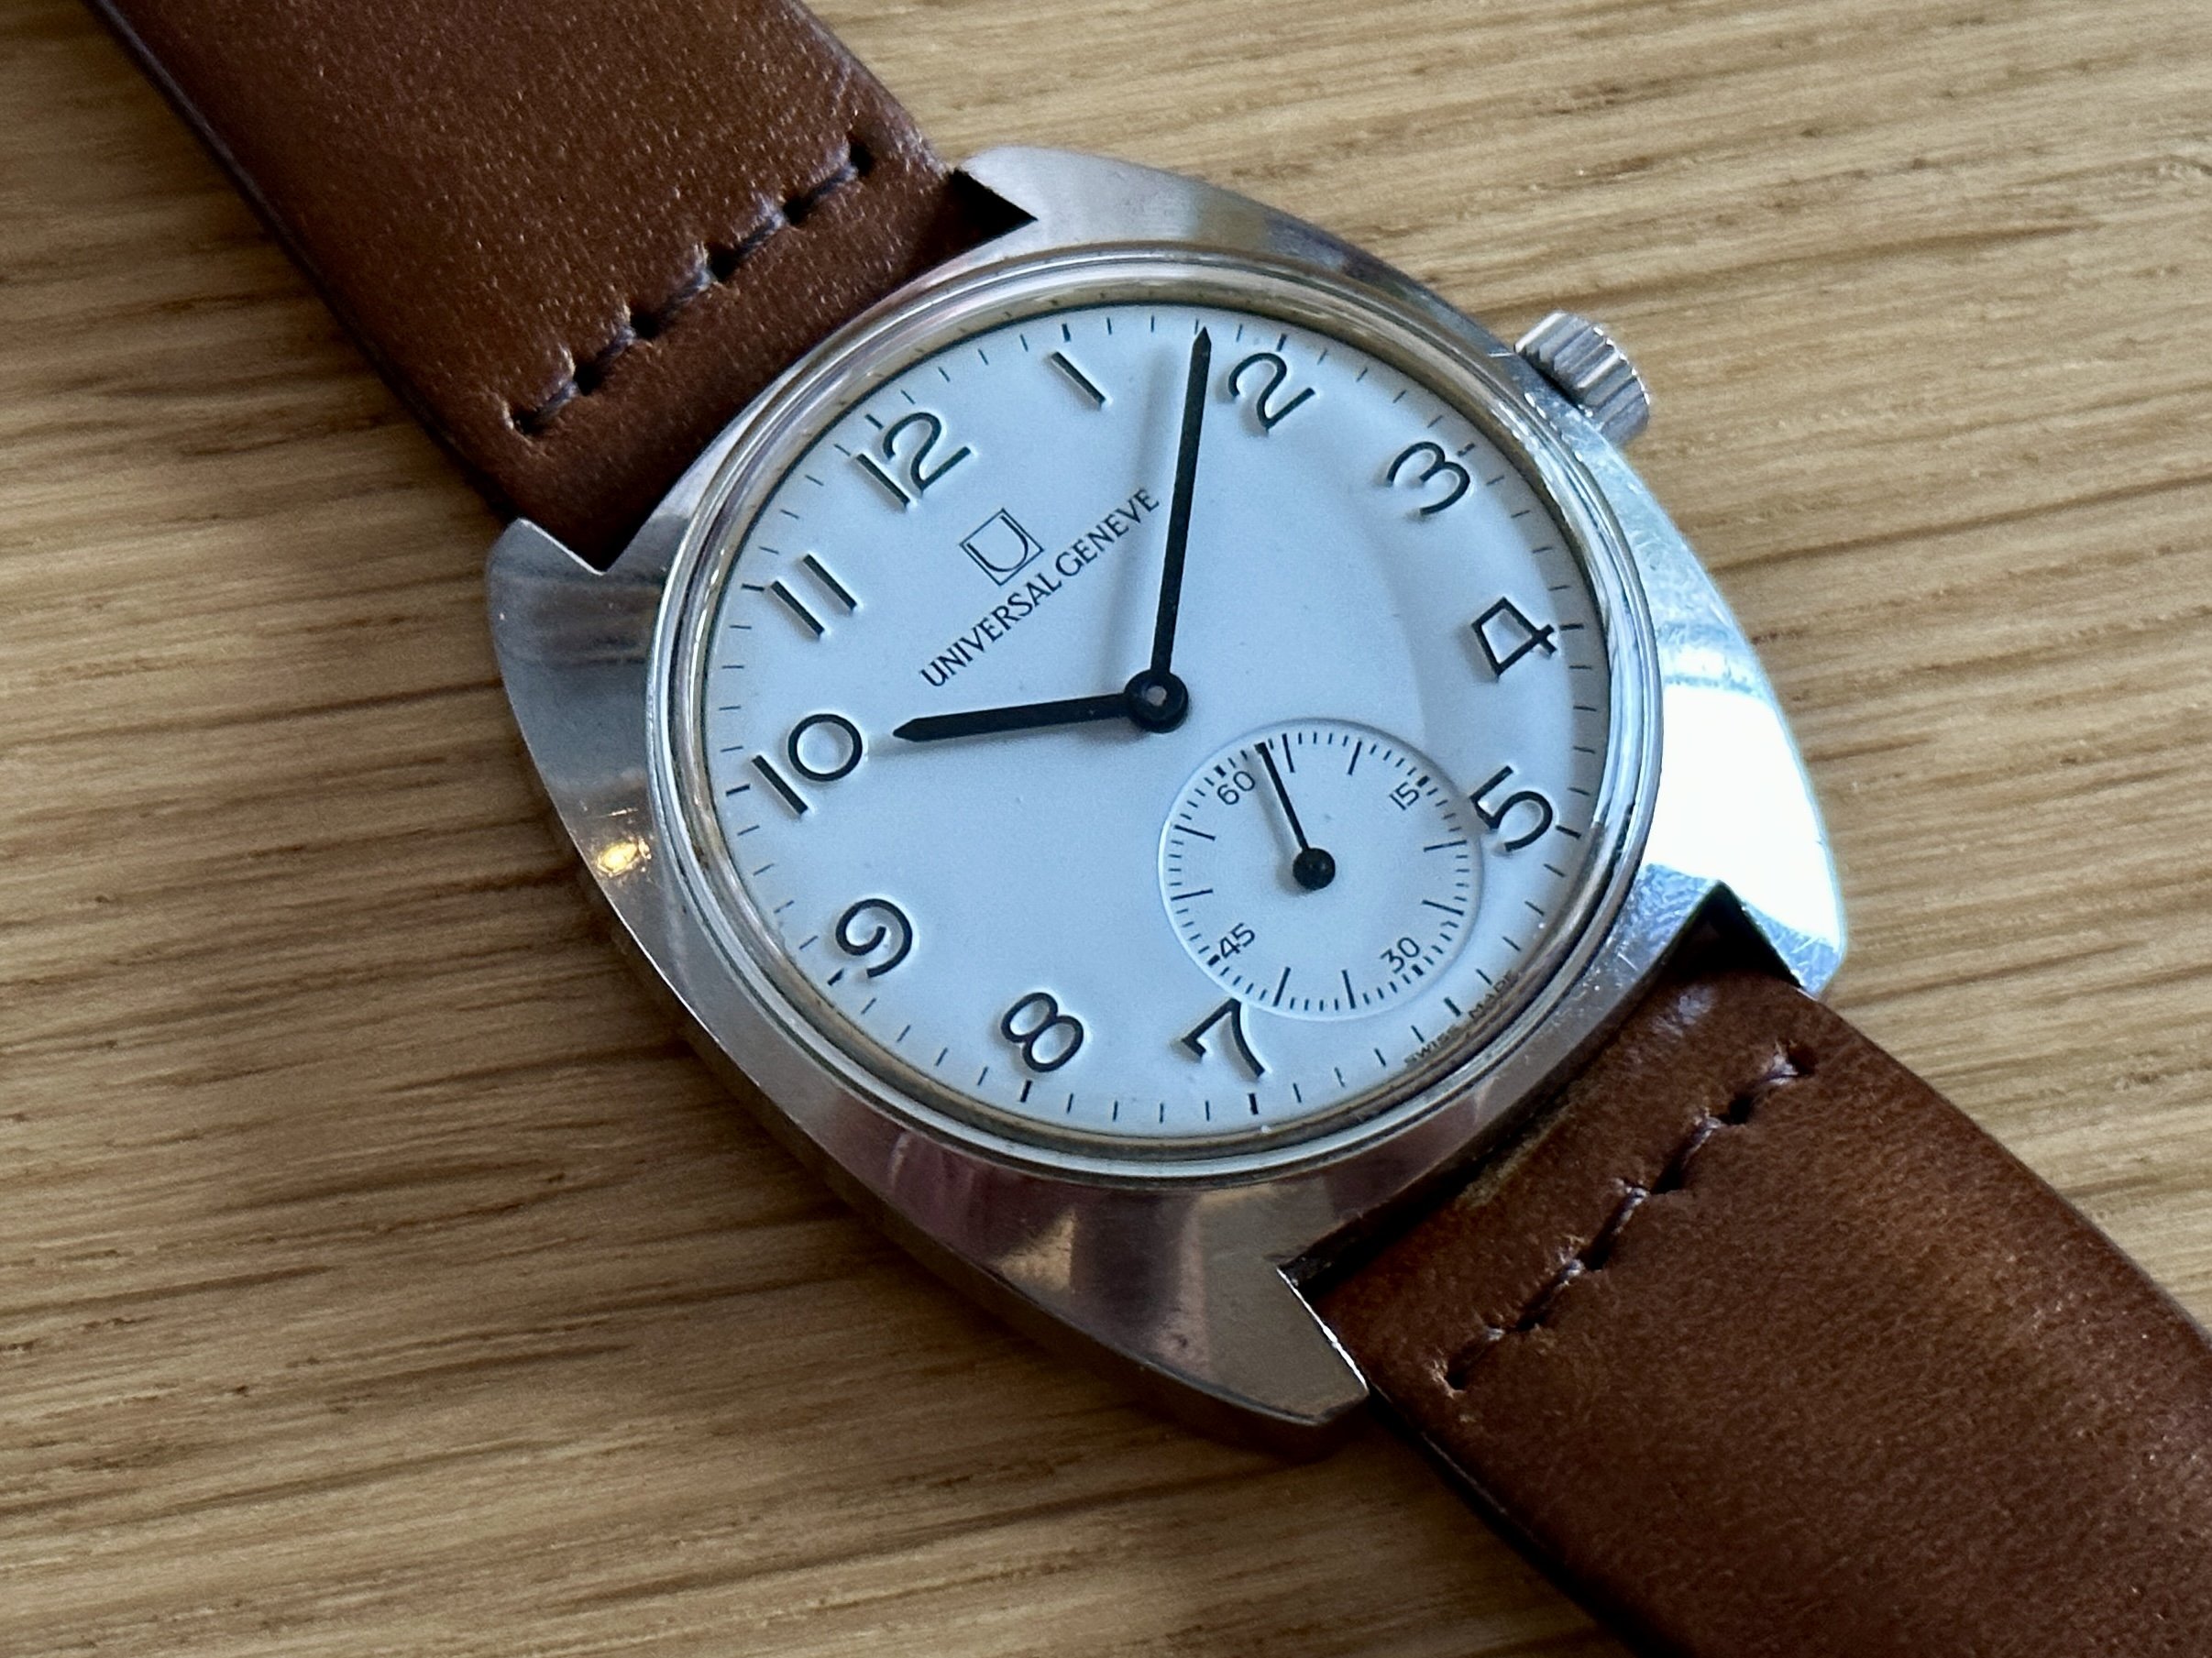 The Eberhard & Co. Scafograf 300 watch hands-on